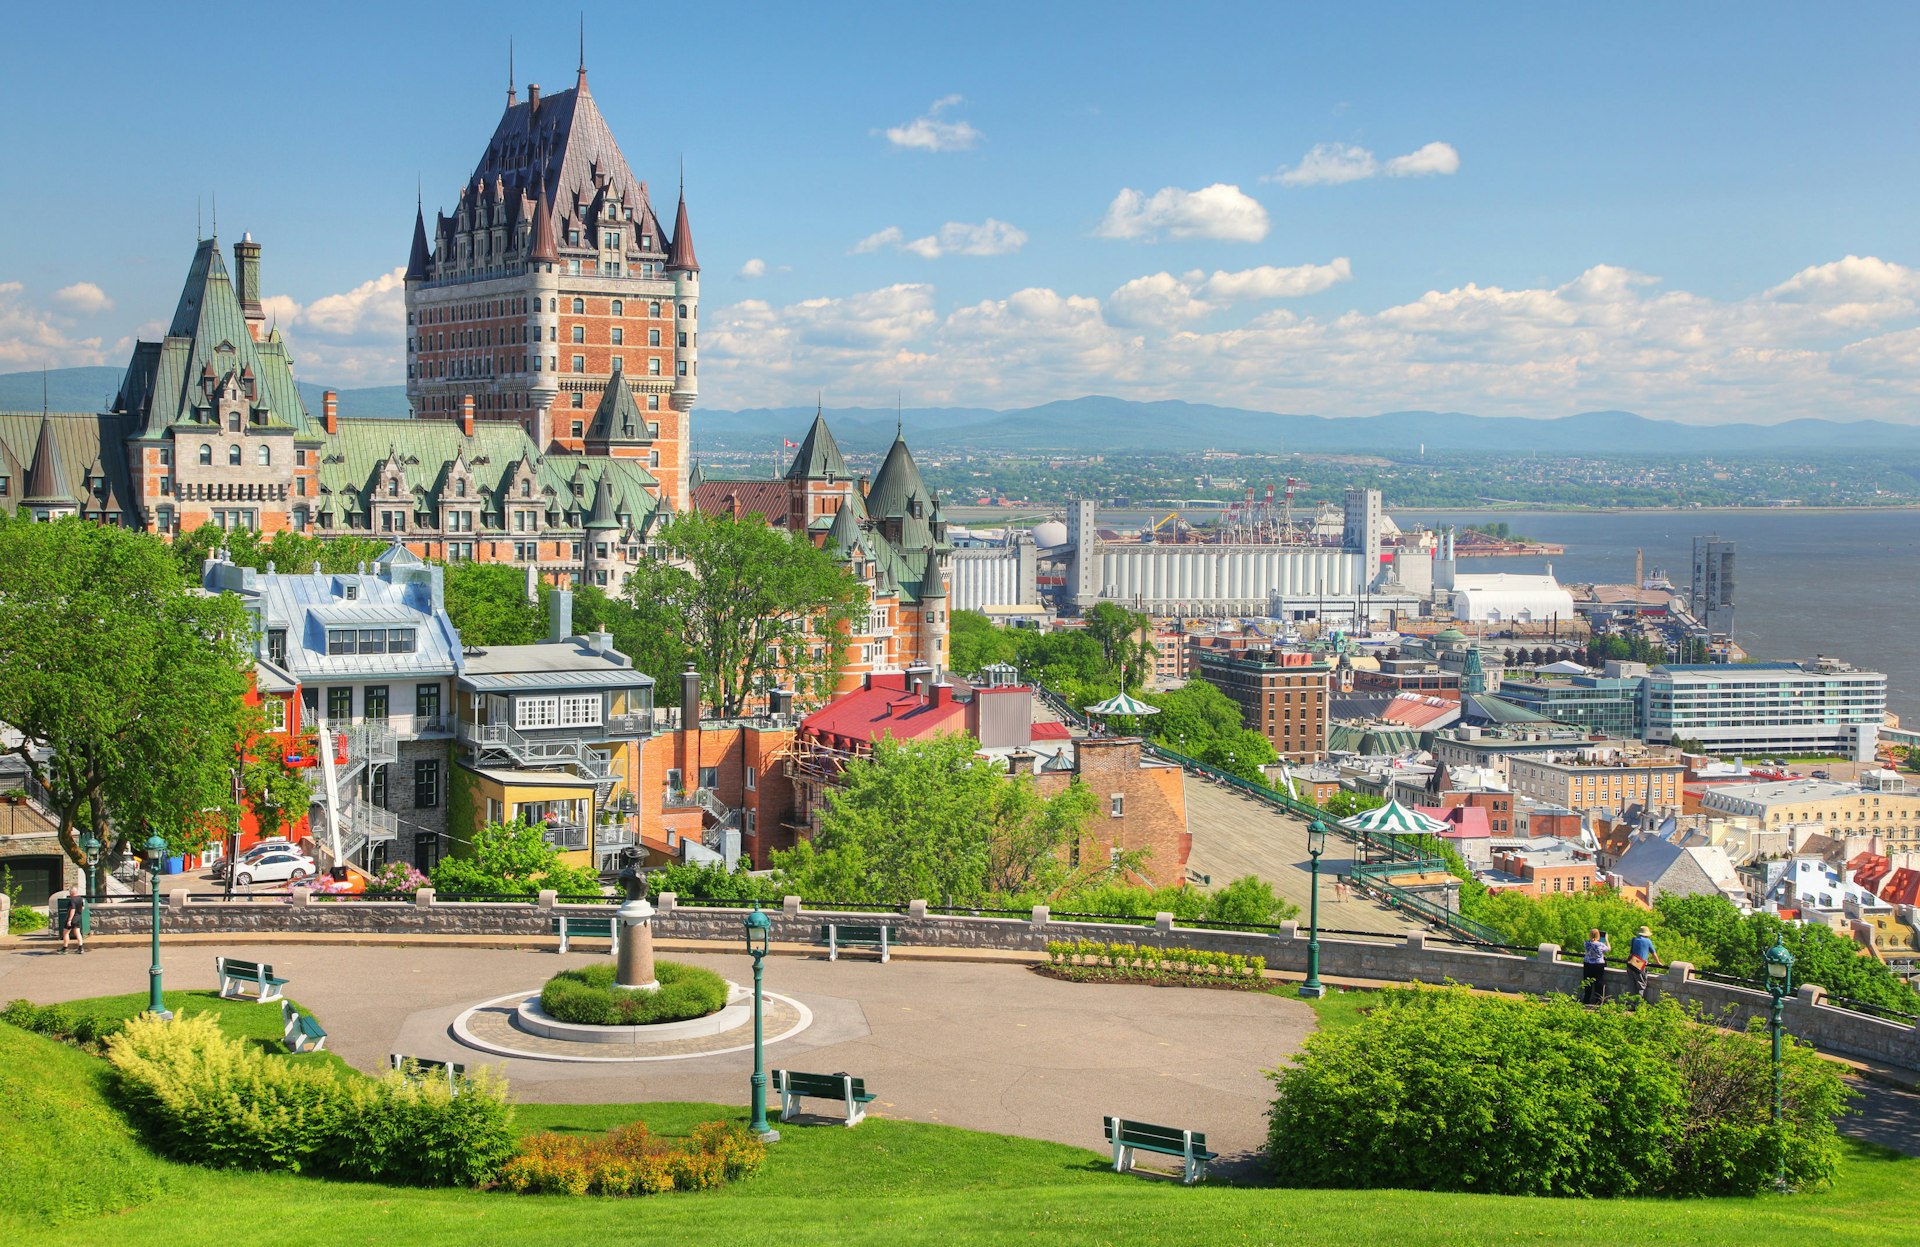 Exterior of Chateau Frontenac in Old Quebec City, seen from Bastion-de-la-Reine